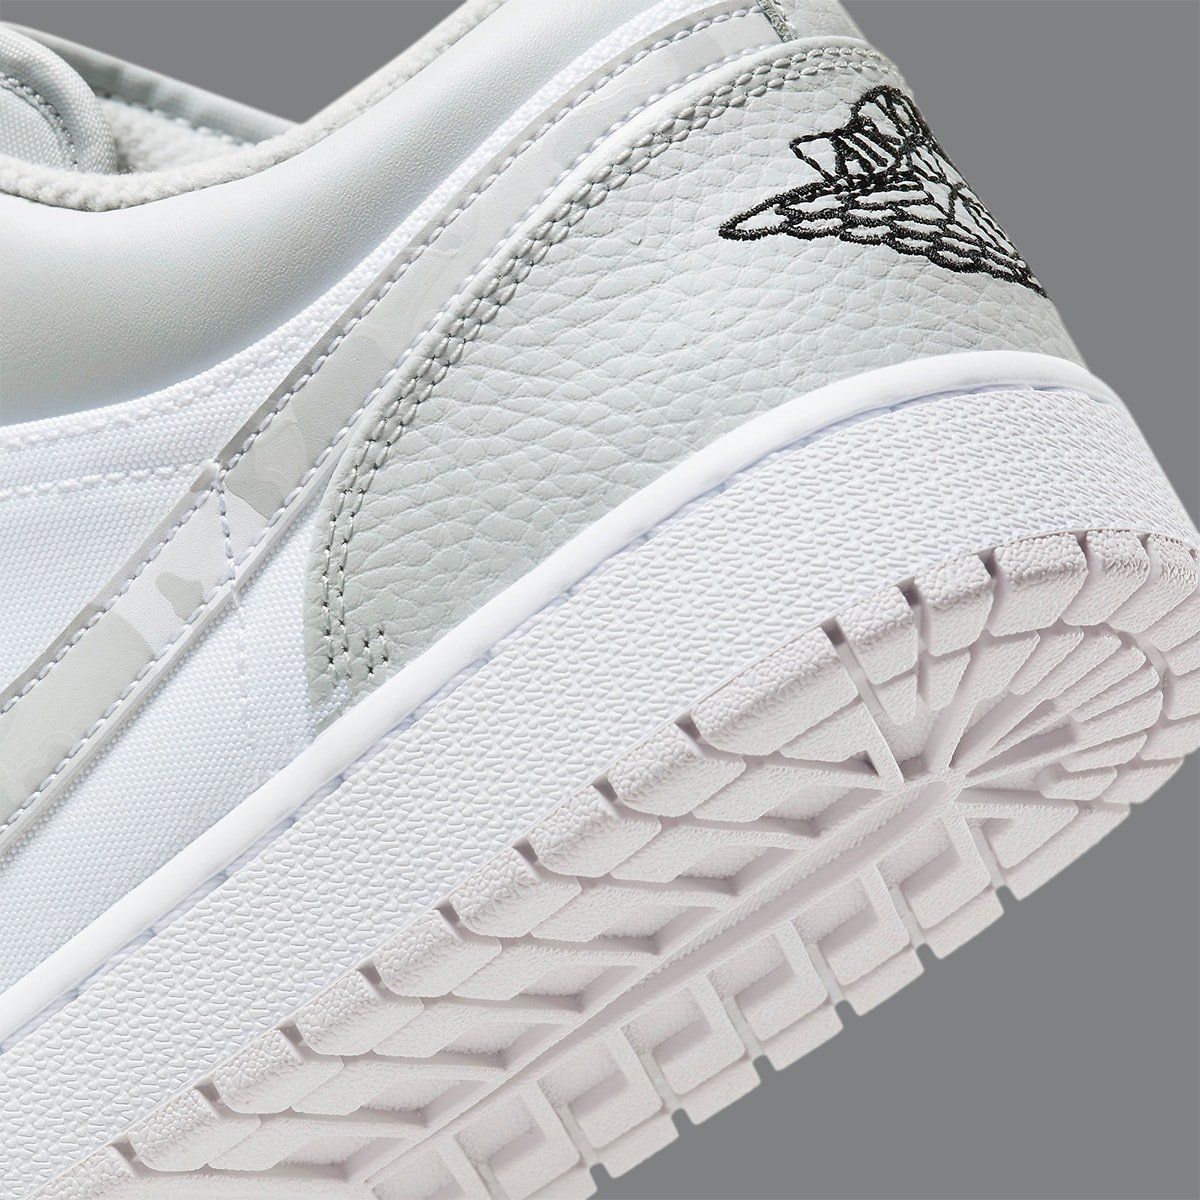 Available Now! Air Jordan 1 Low 